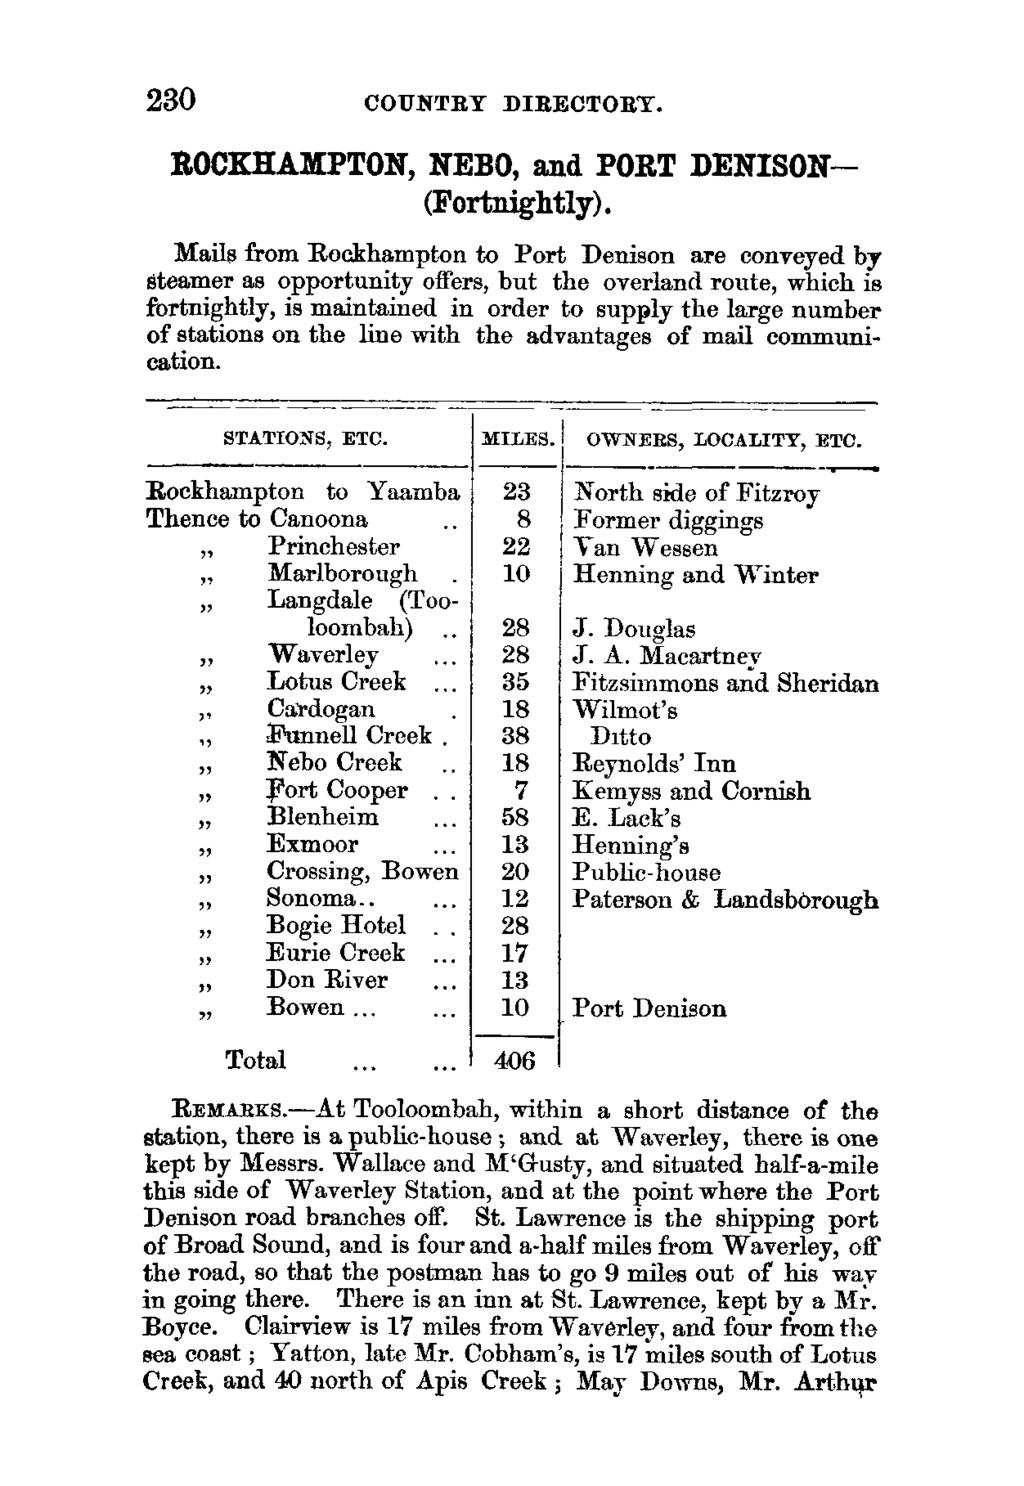 230 COUNTRY DIRECTORY. ROCHHANIPTON, NEBO, and PORT DENISON- (Fortnightly). STATIONS, ETC. MILES. OWNERS, LOCALITY, ETC.